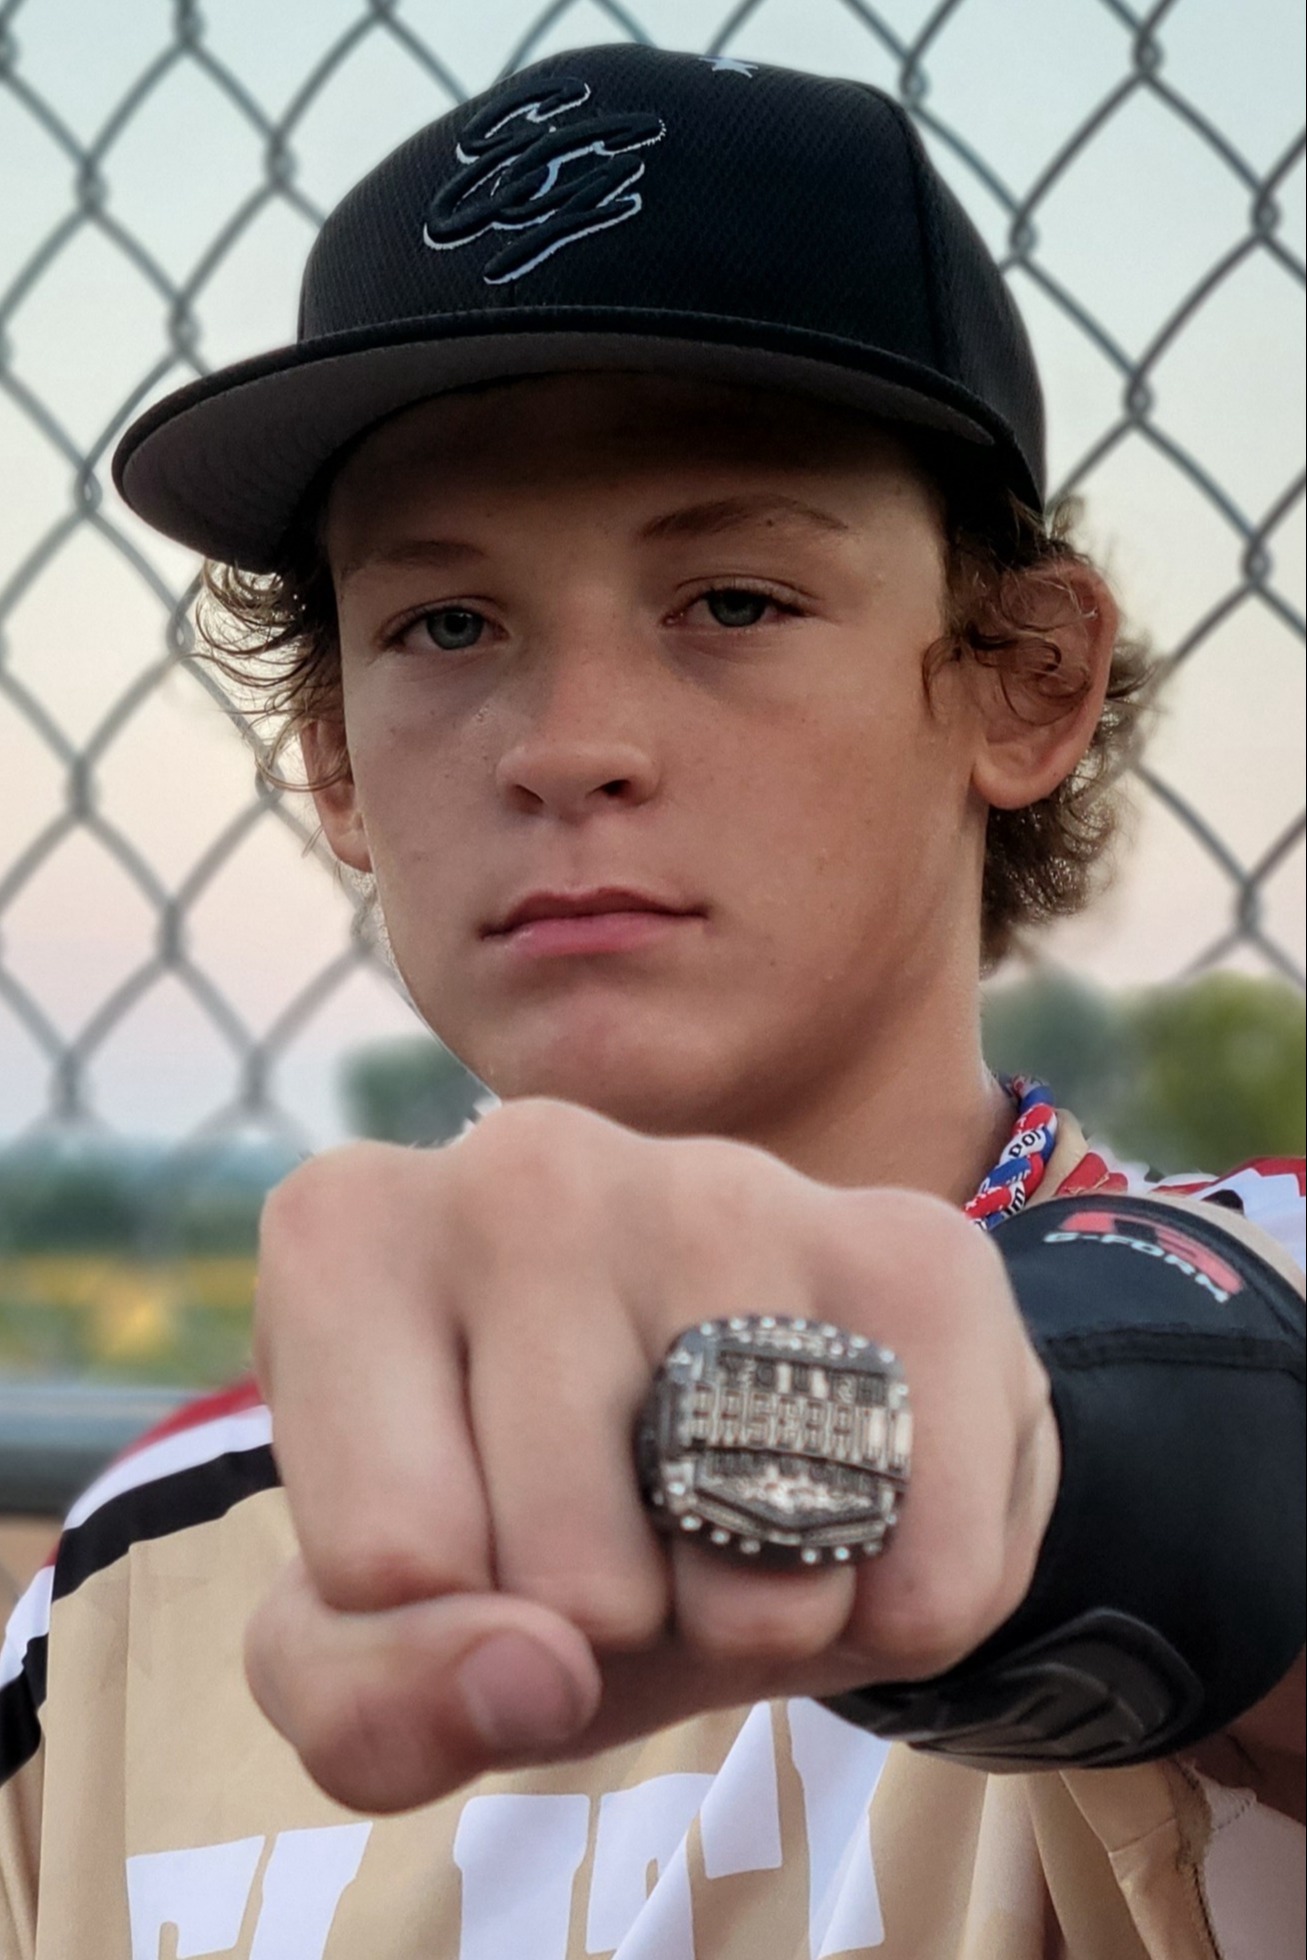 Levi Coovert Baseball Player Profile Greater Midwest Baseball The